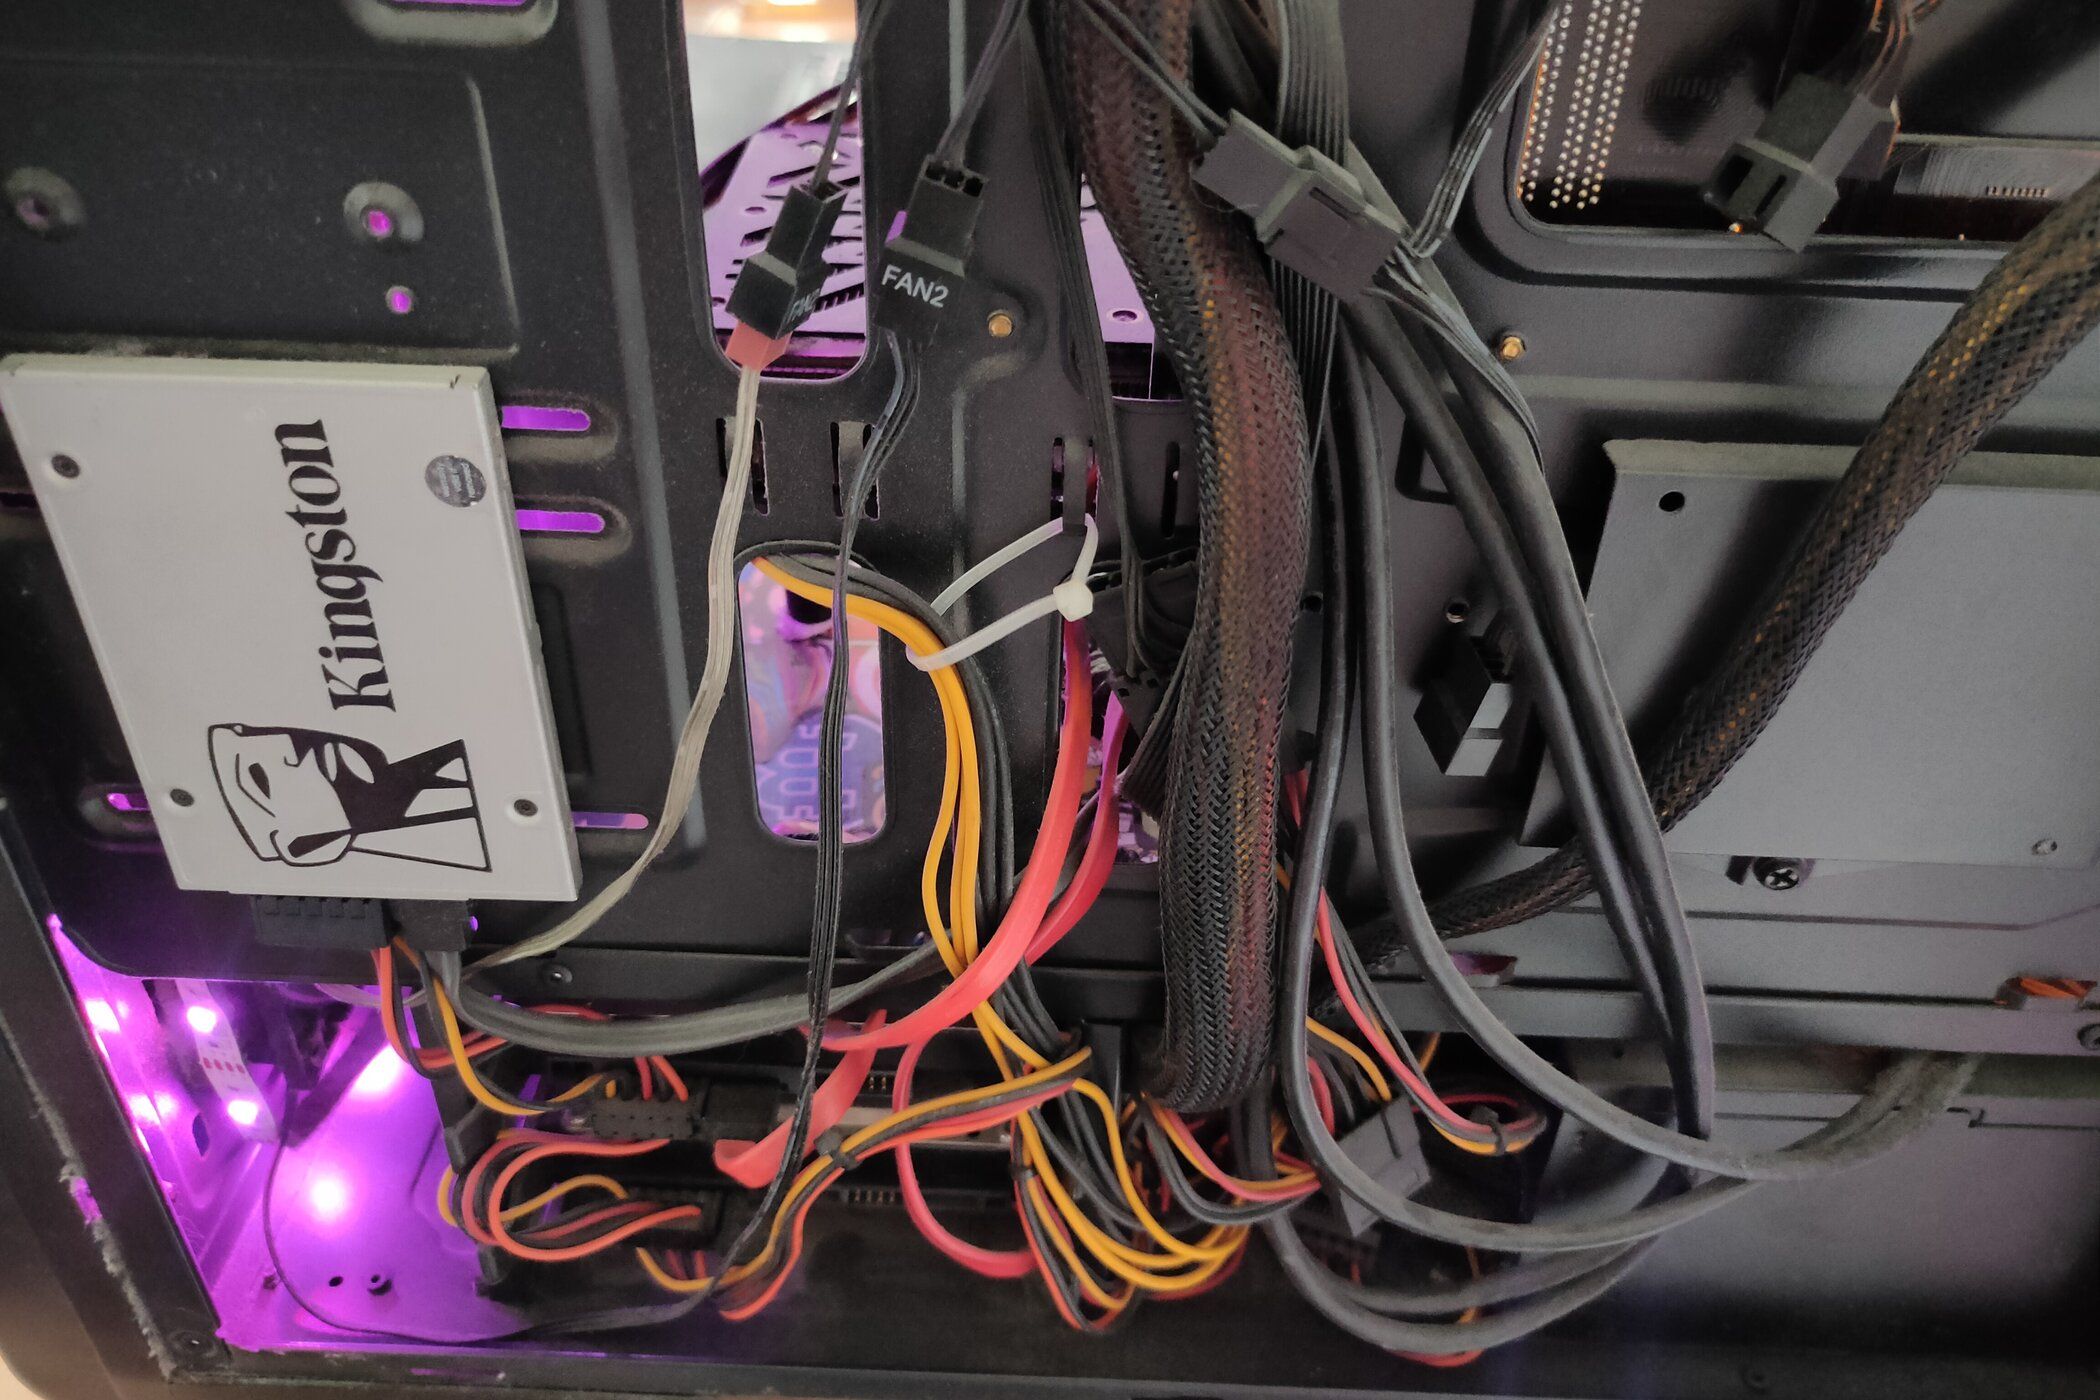 The inside of a PC with many colorful and messy cables.